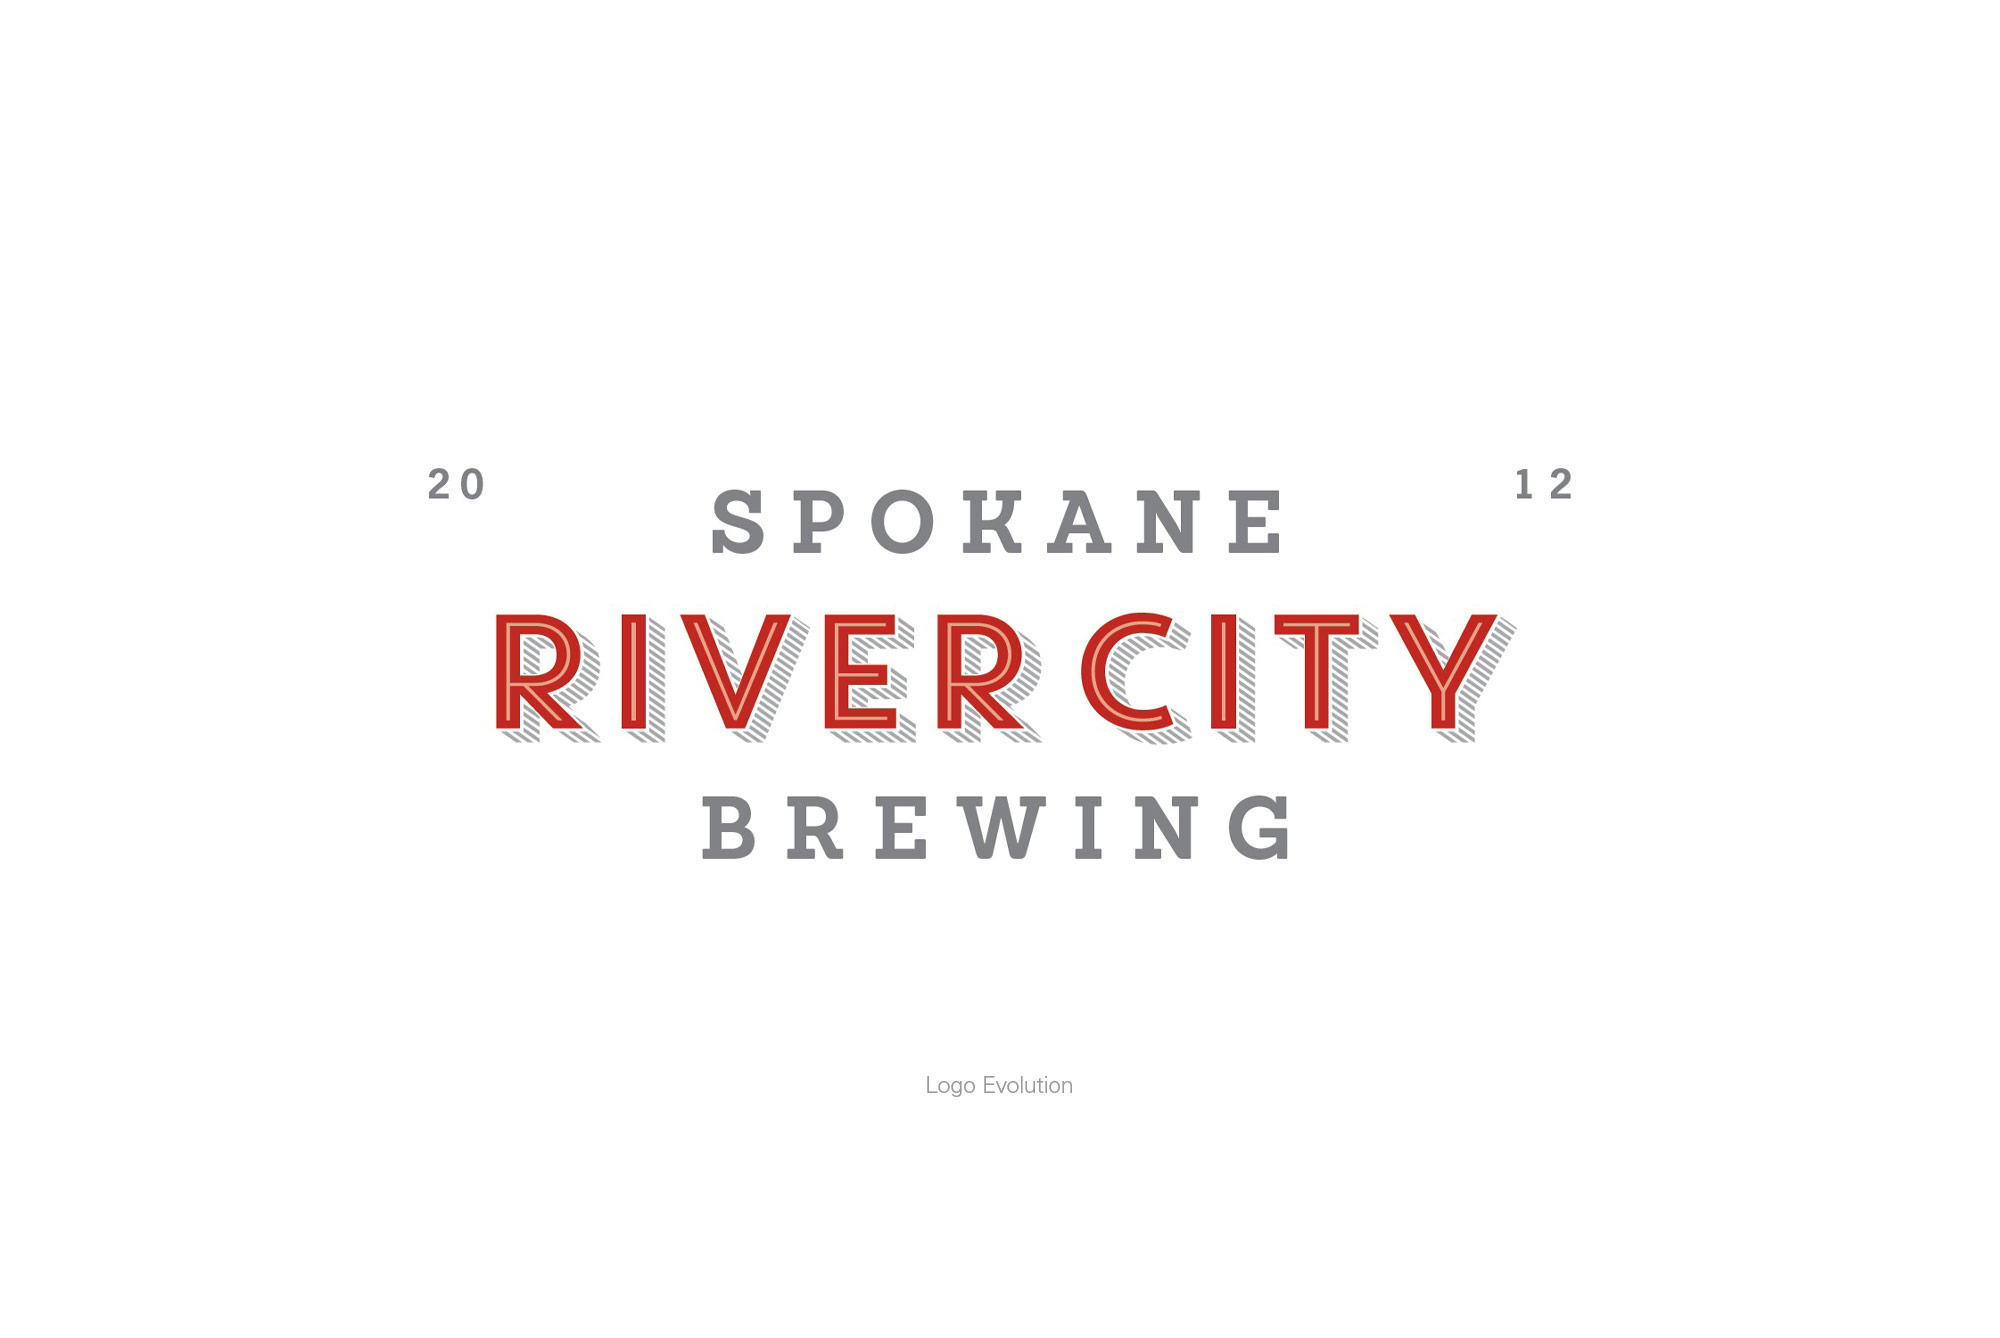 Brand logo design for craft beer company River City Brewing.